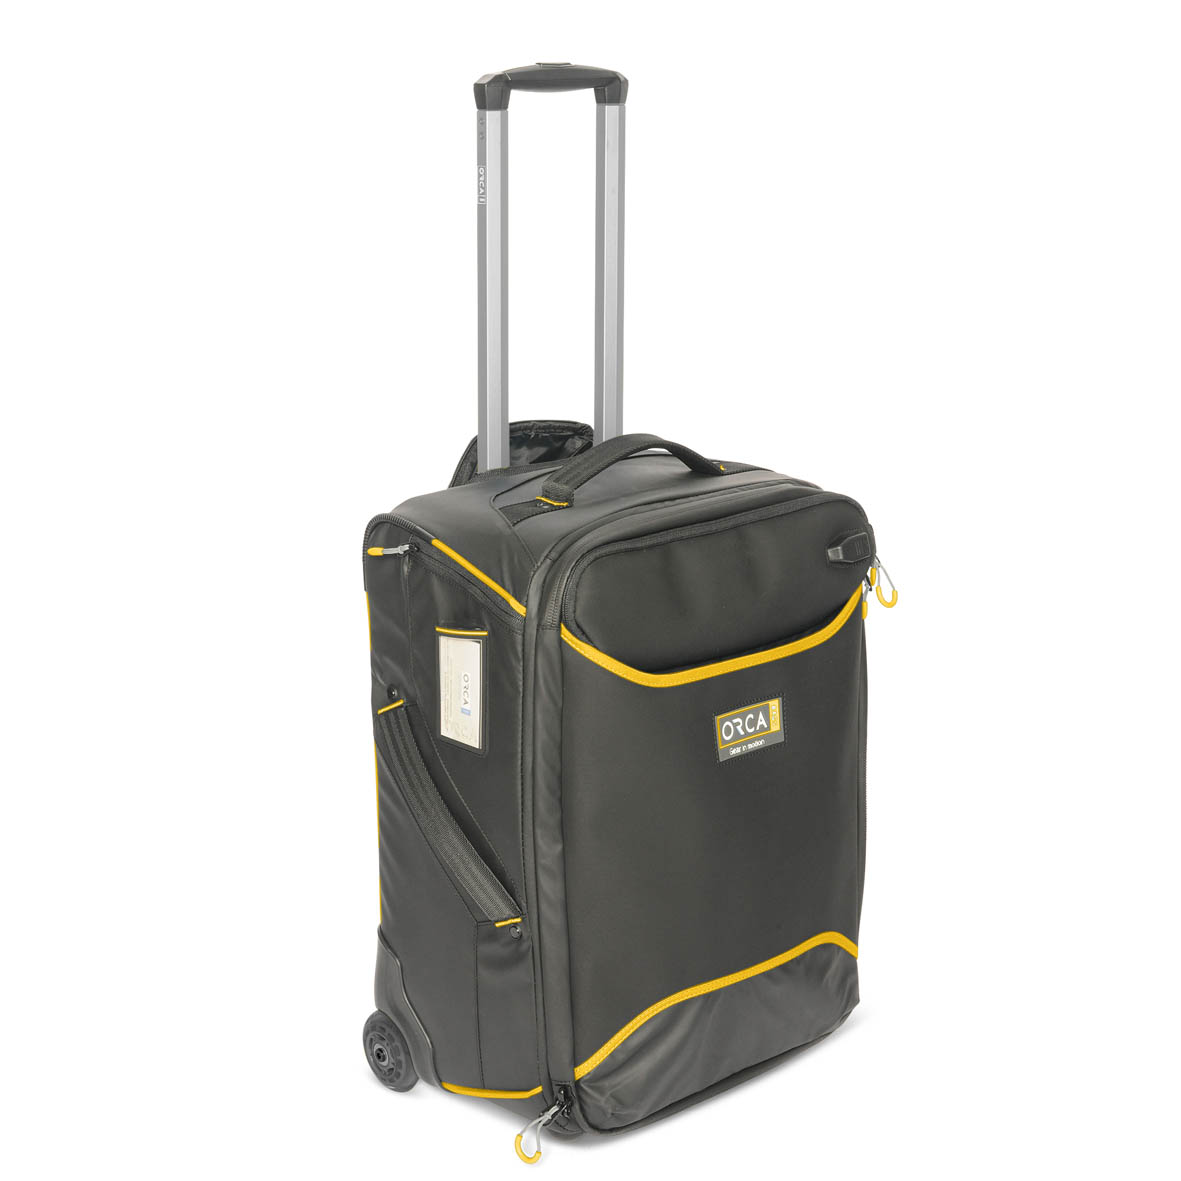 Orca DSLR - Trolley case, medium, with backpack system